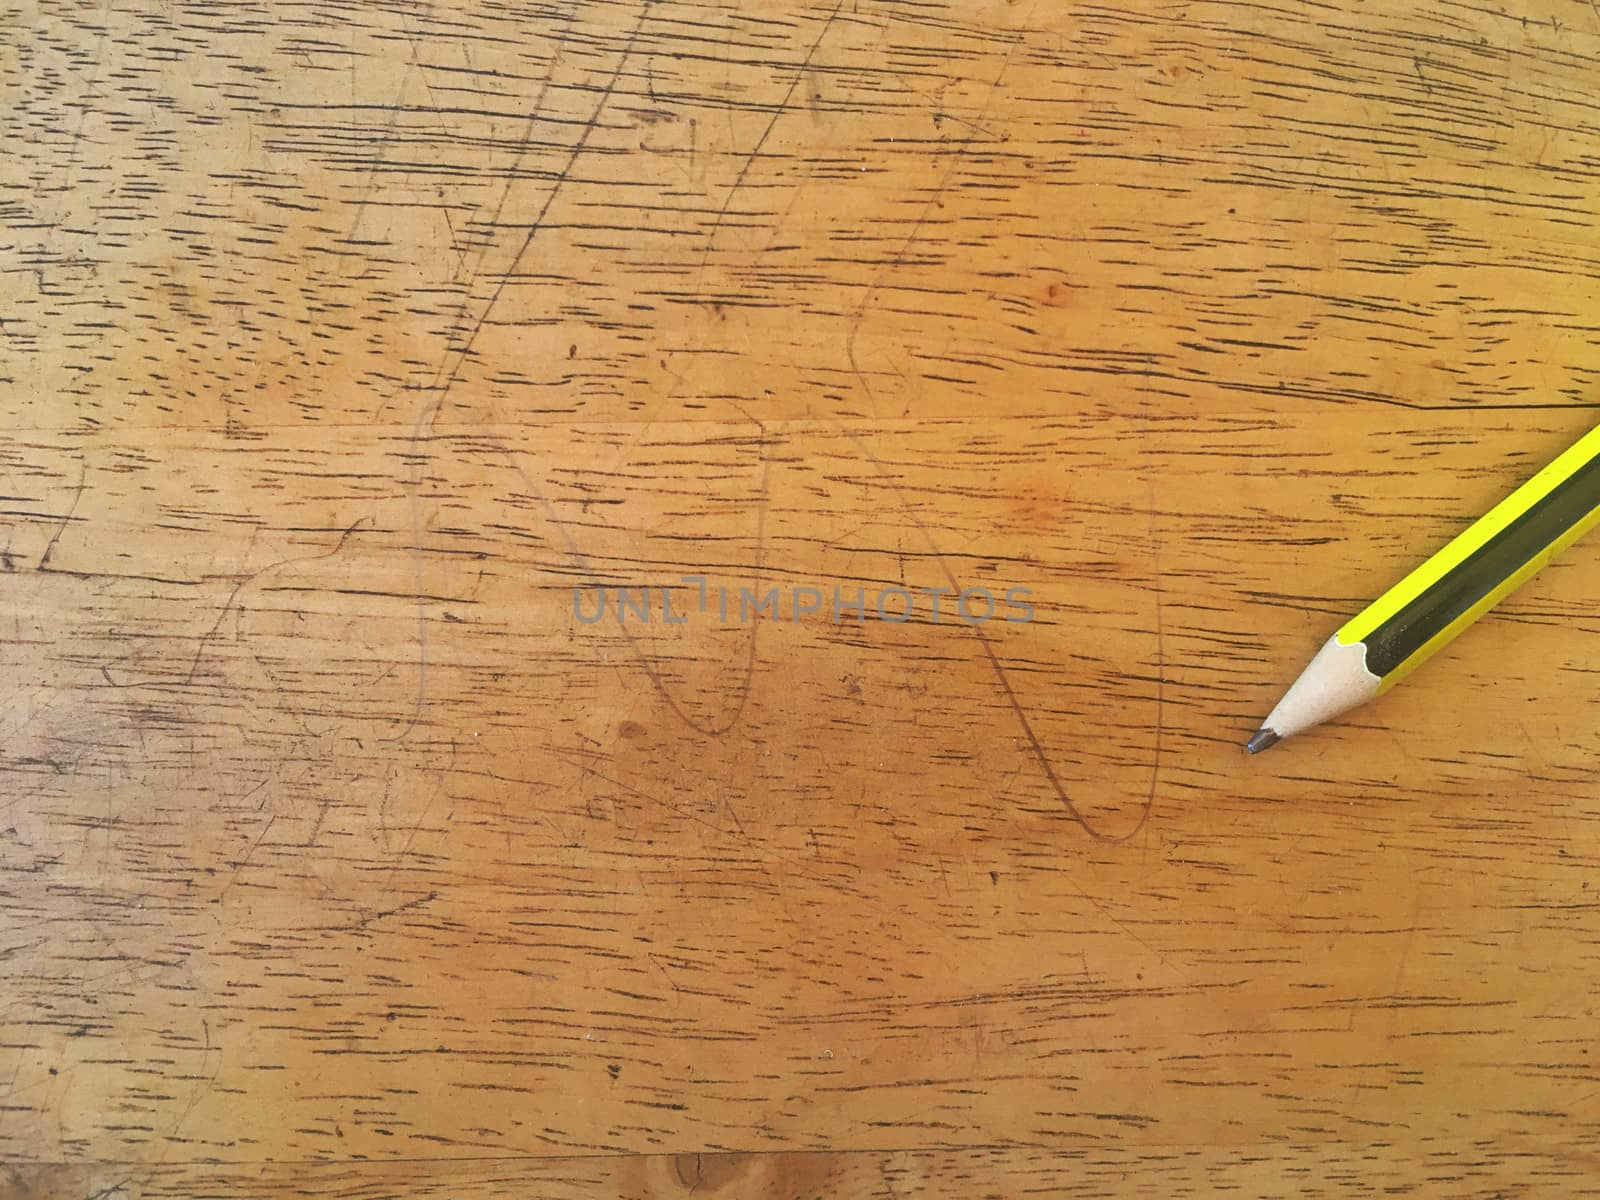 Green and yellow pencil on bright wood floor by e22xua